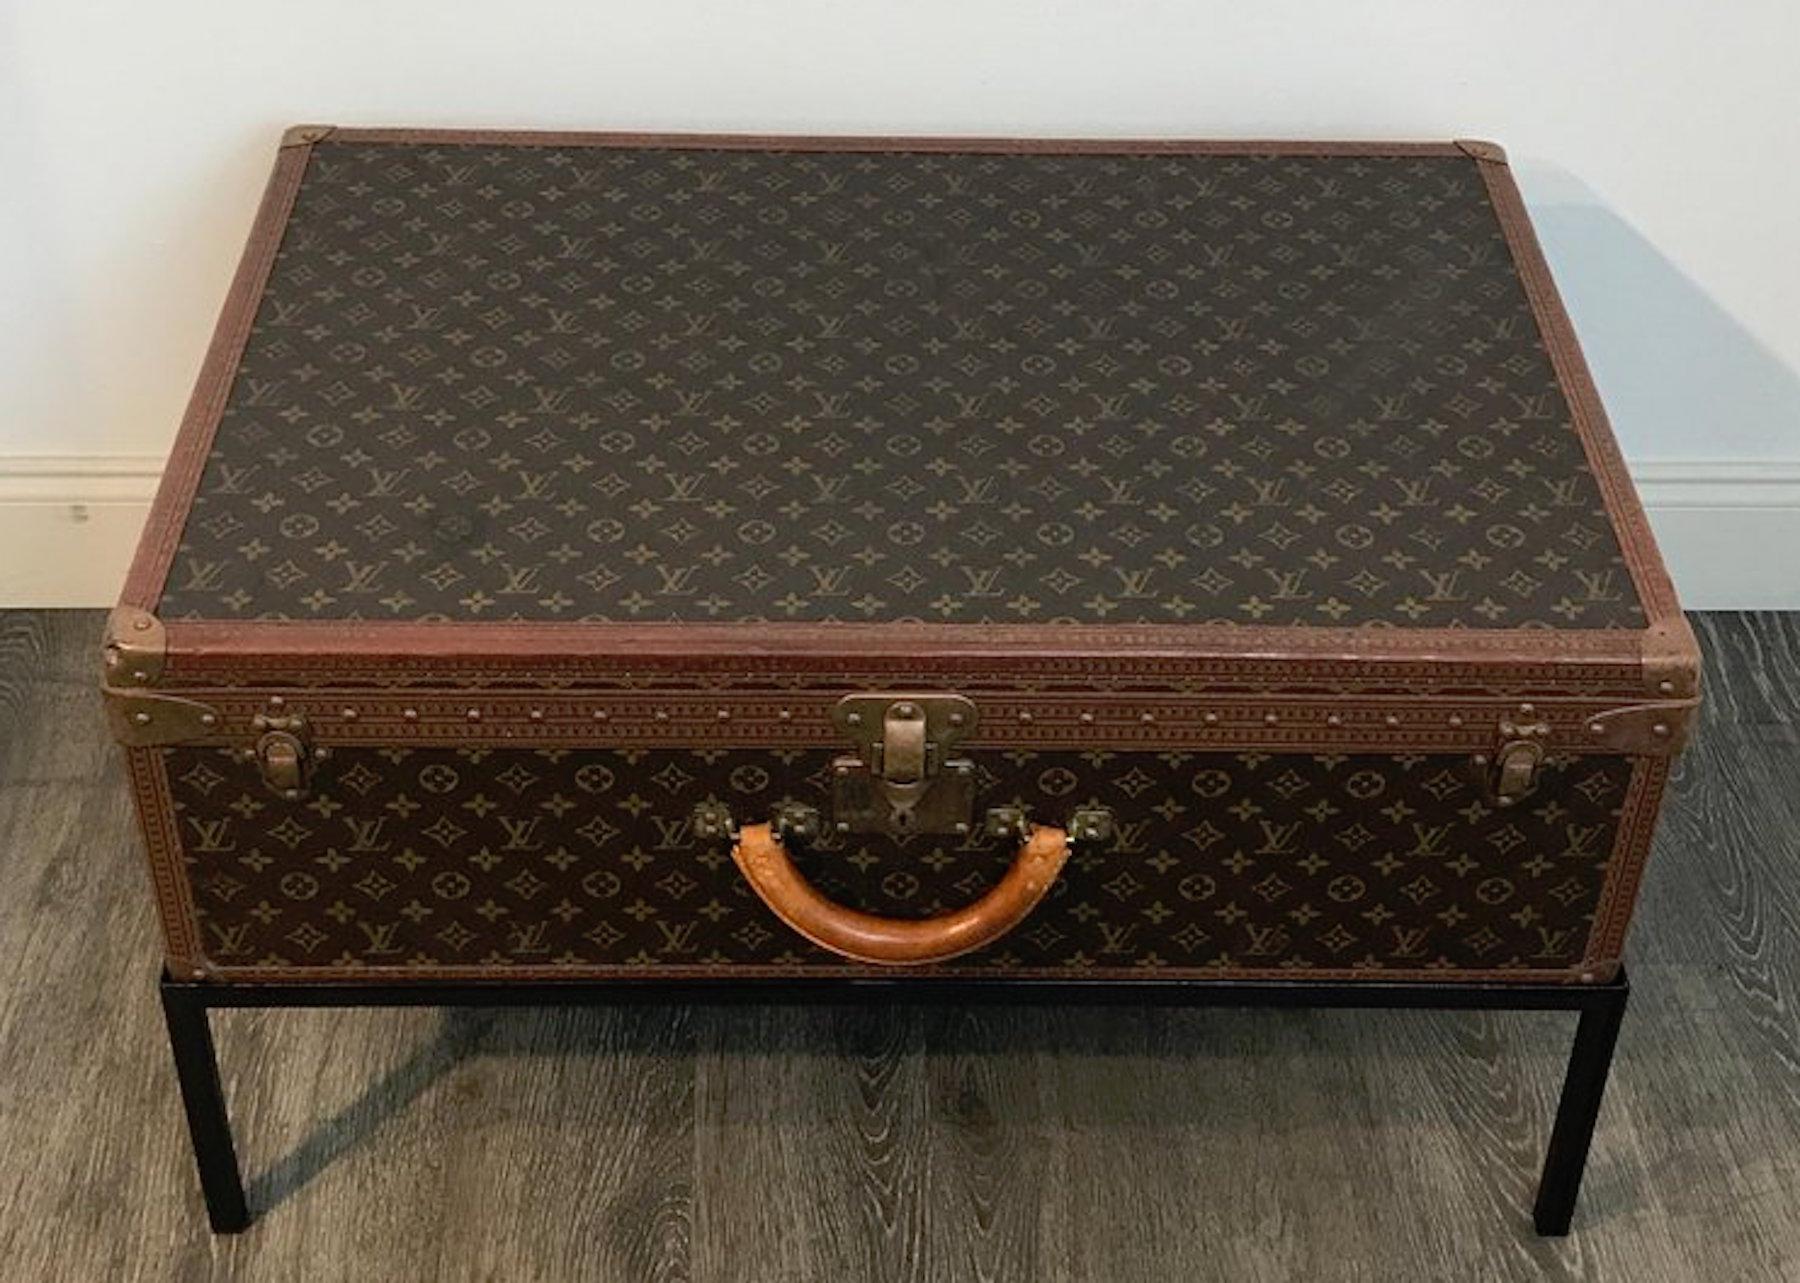 Louis Vuitton Monogram hard case suitcase or trunk on iron stand, 18